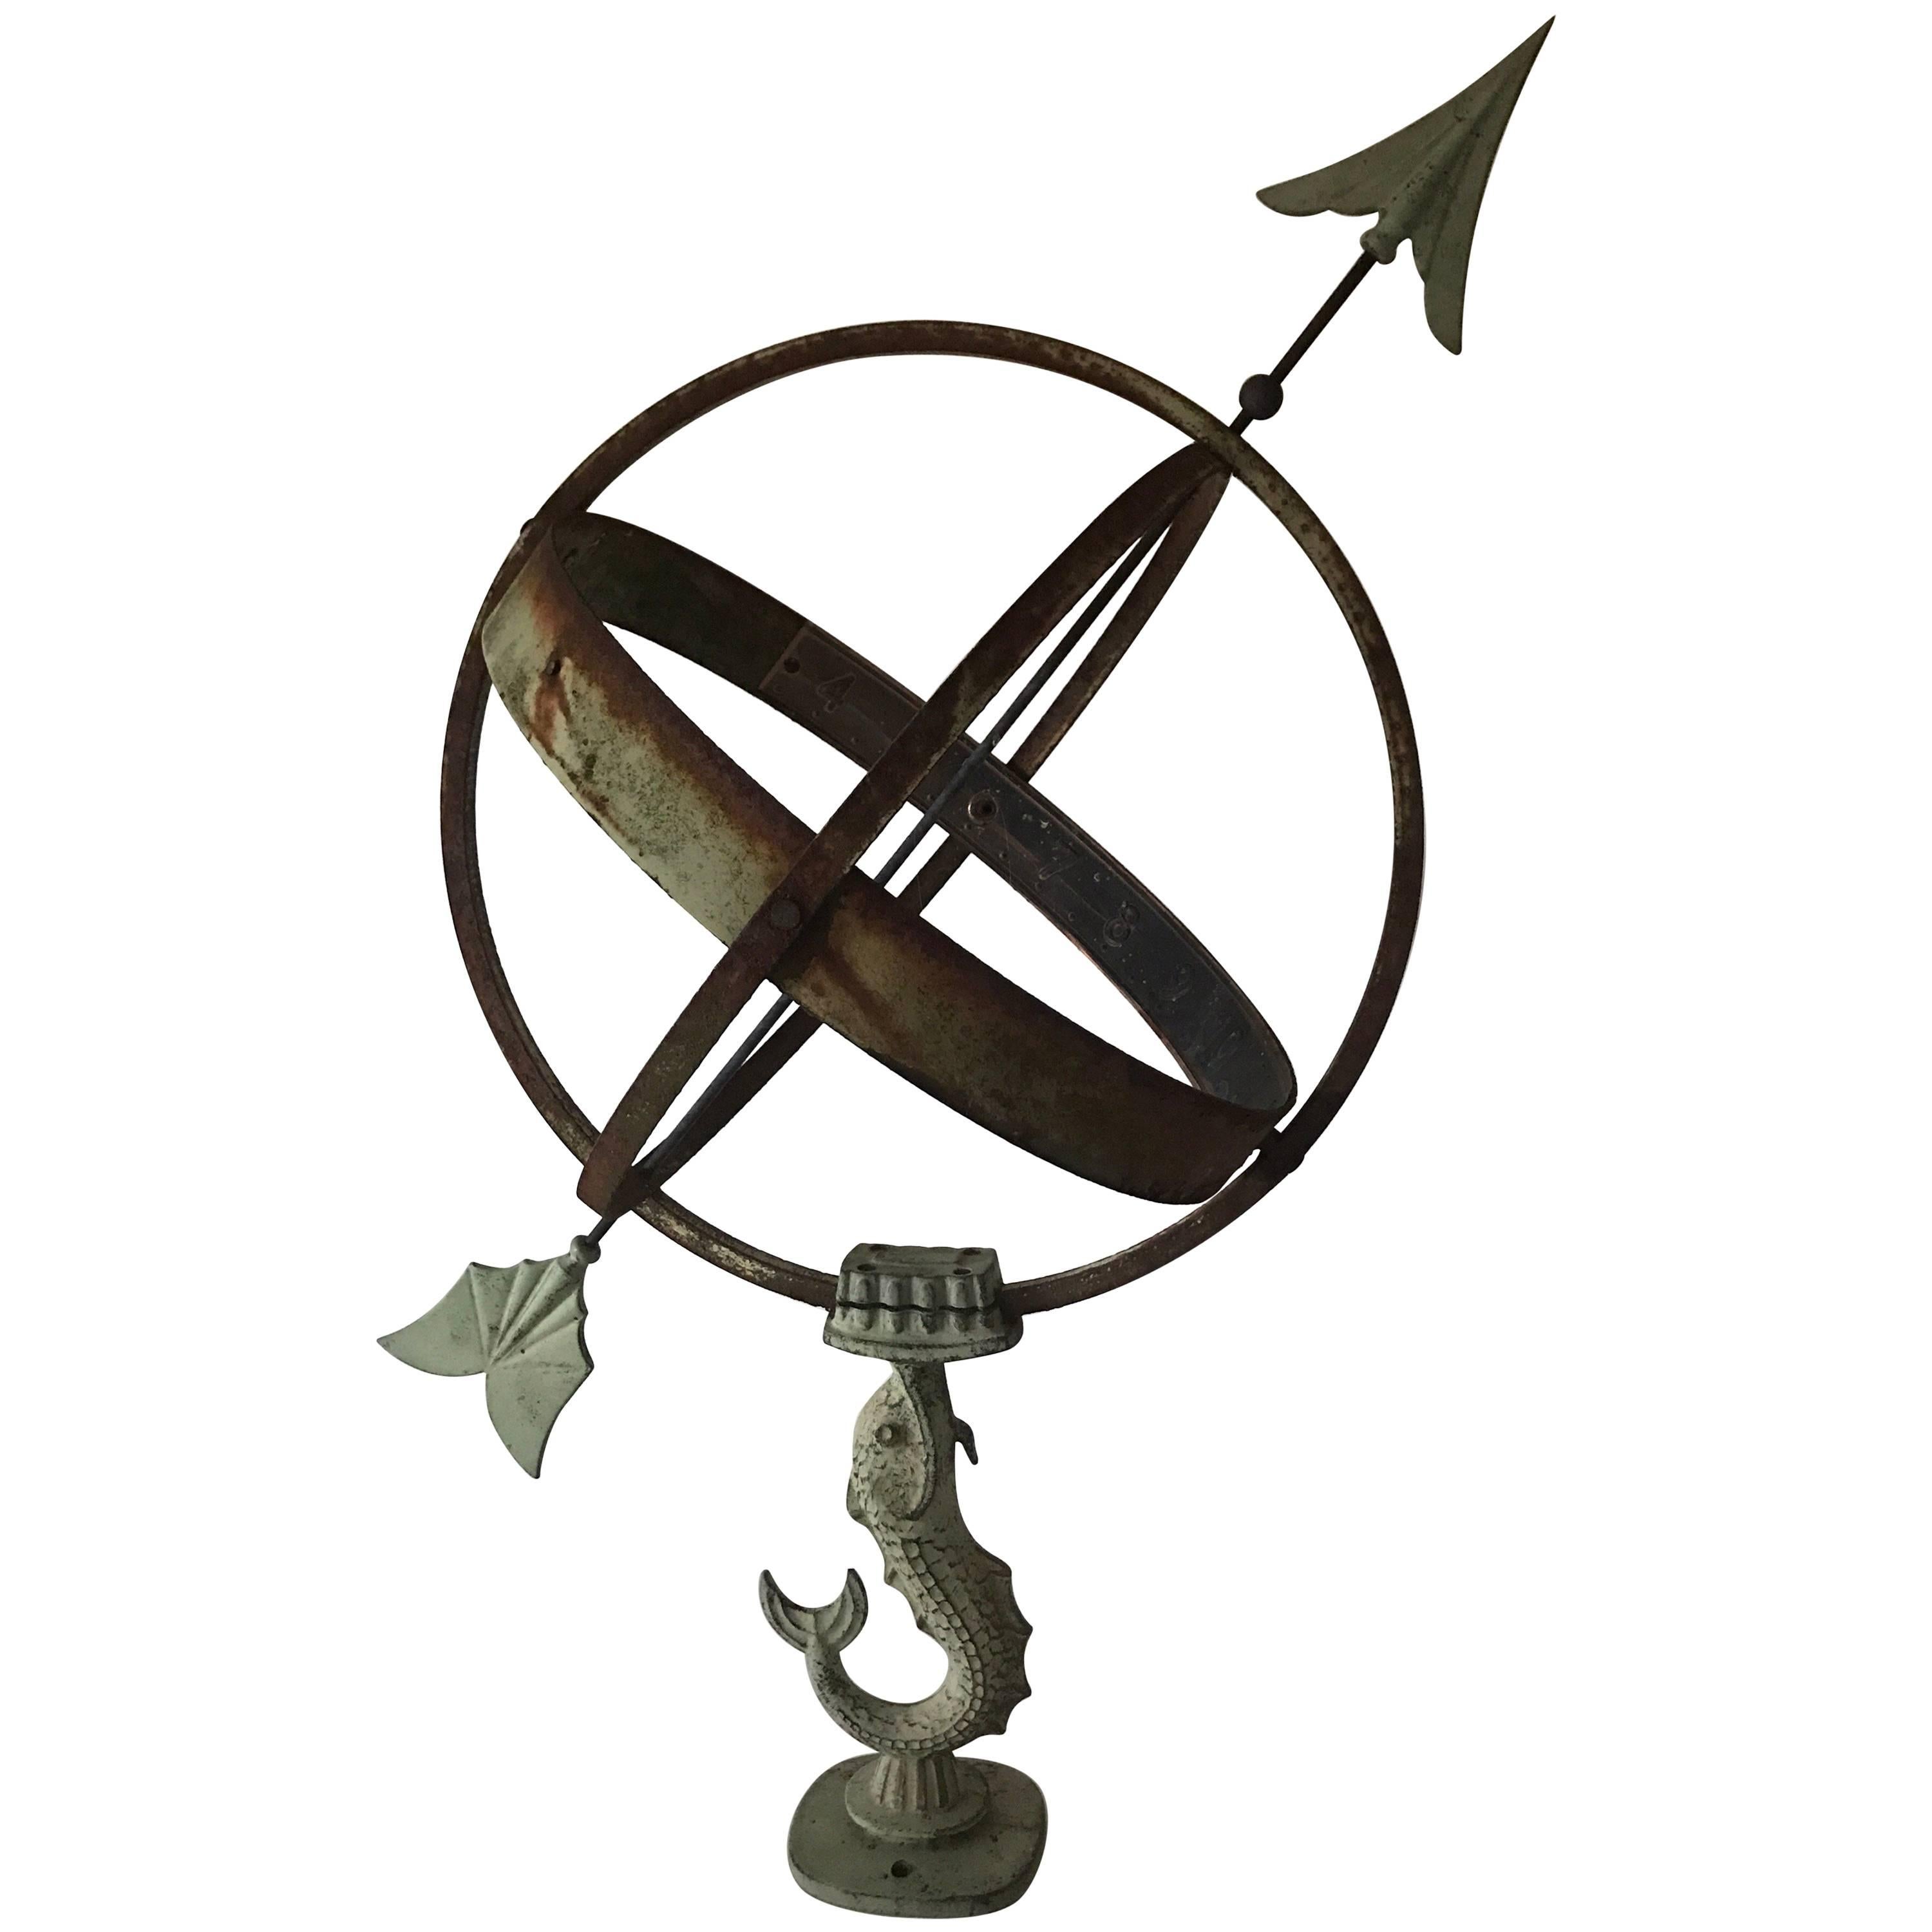 Large Swedish Mid-20th Century Wrought Iron and Copper Garden Sundial